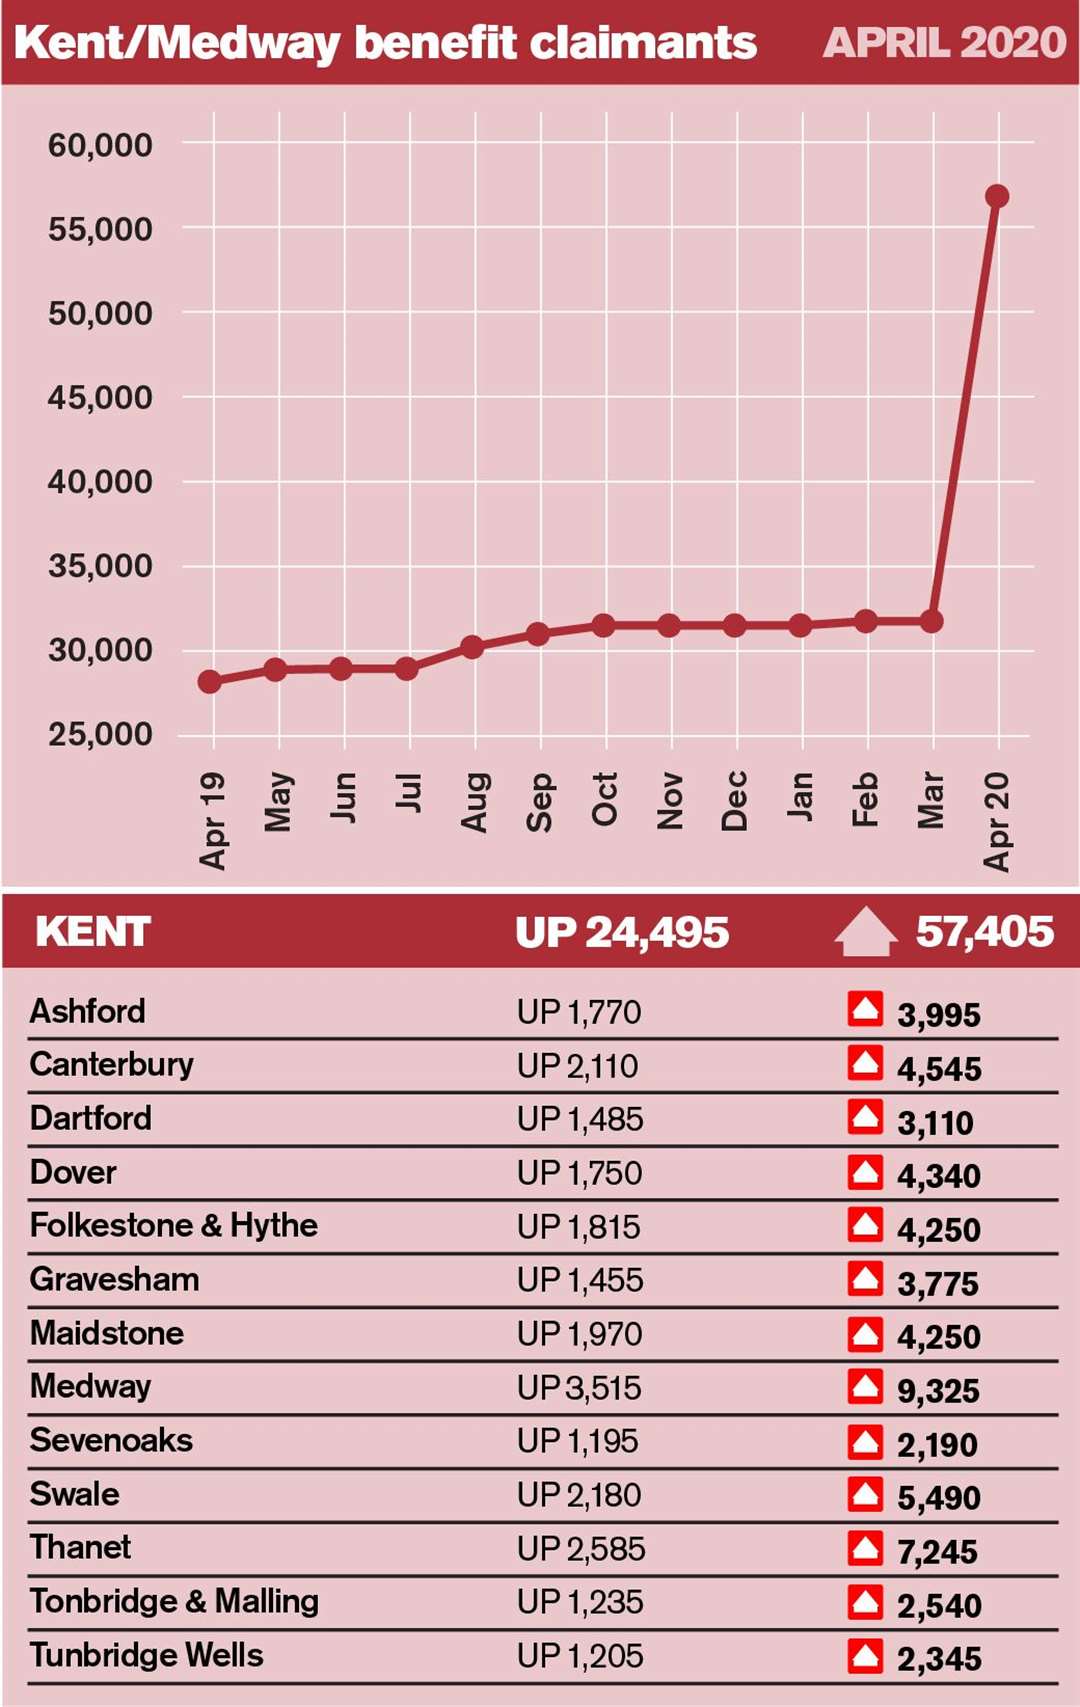 A chart detailing Kent's unemployment benefit applications highlights last month's dramatic surge